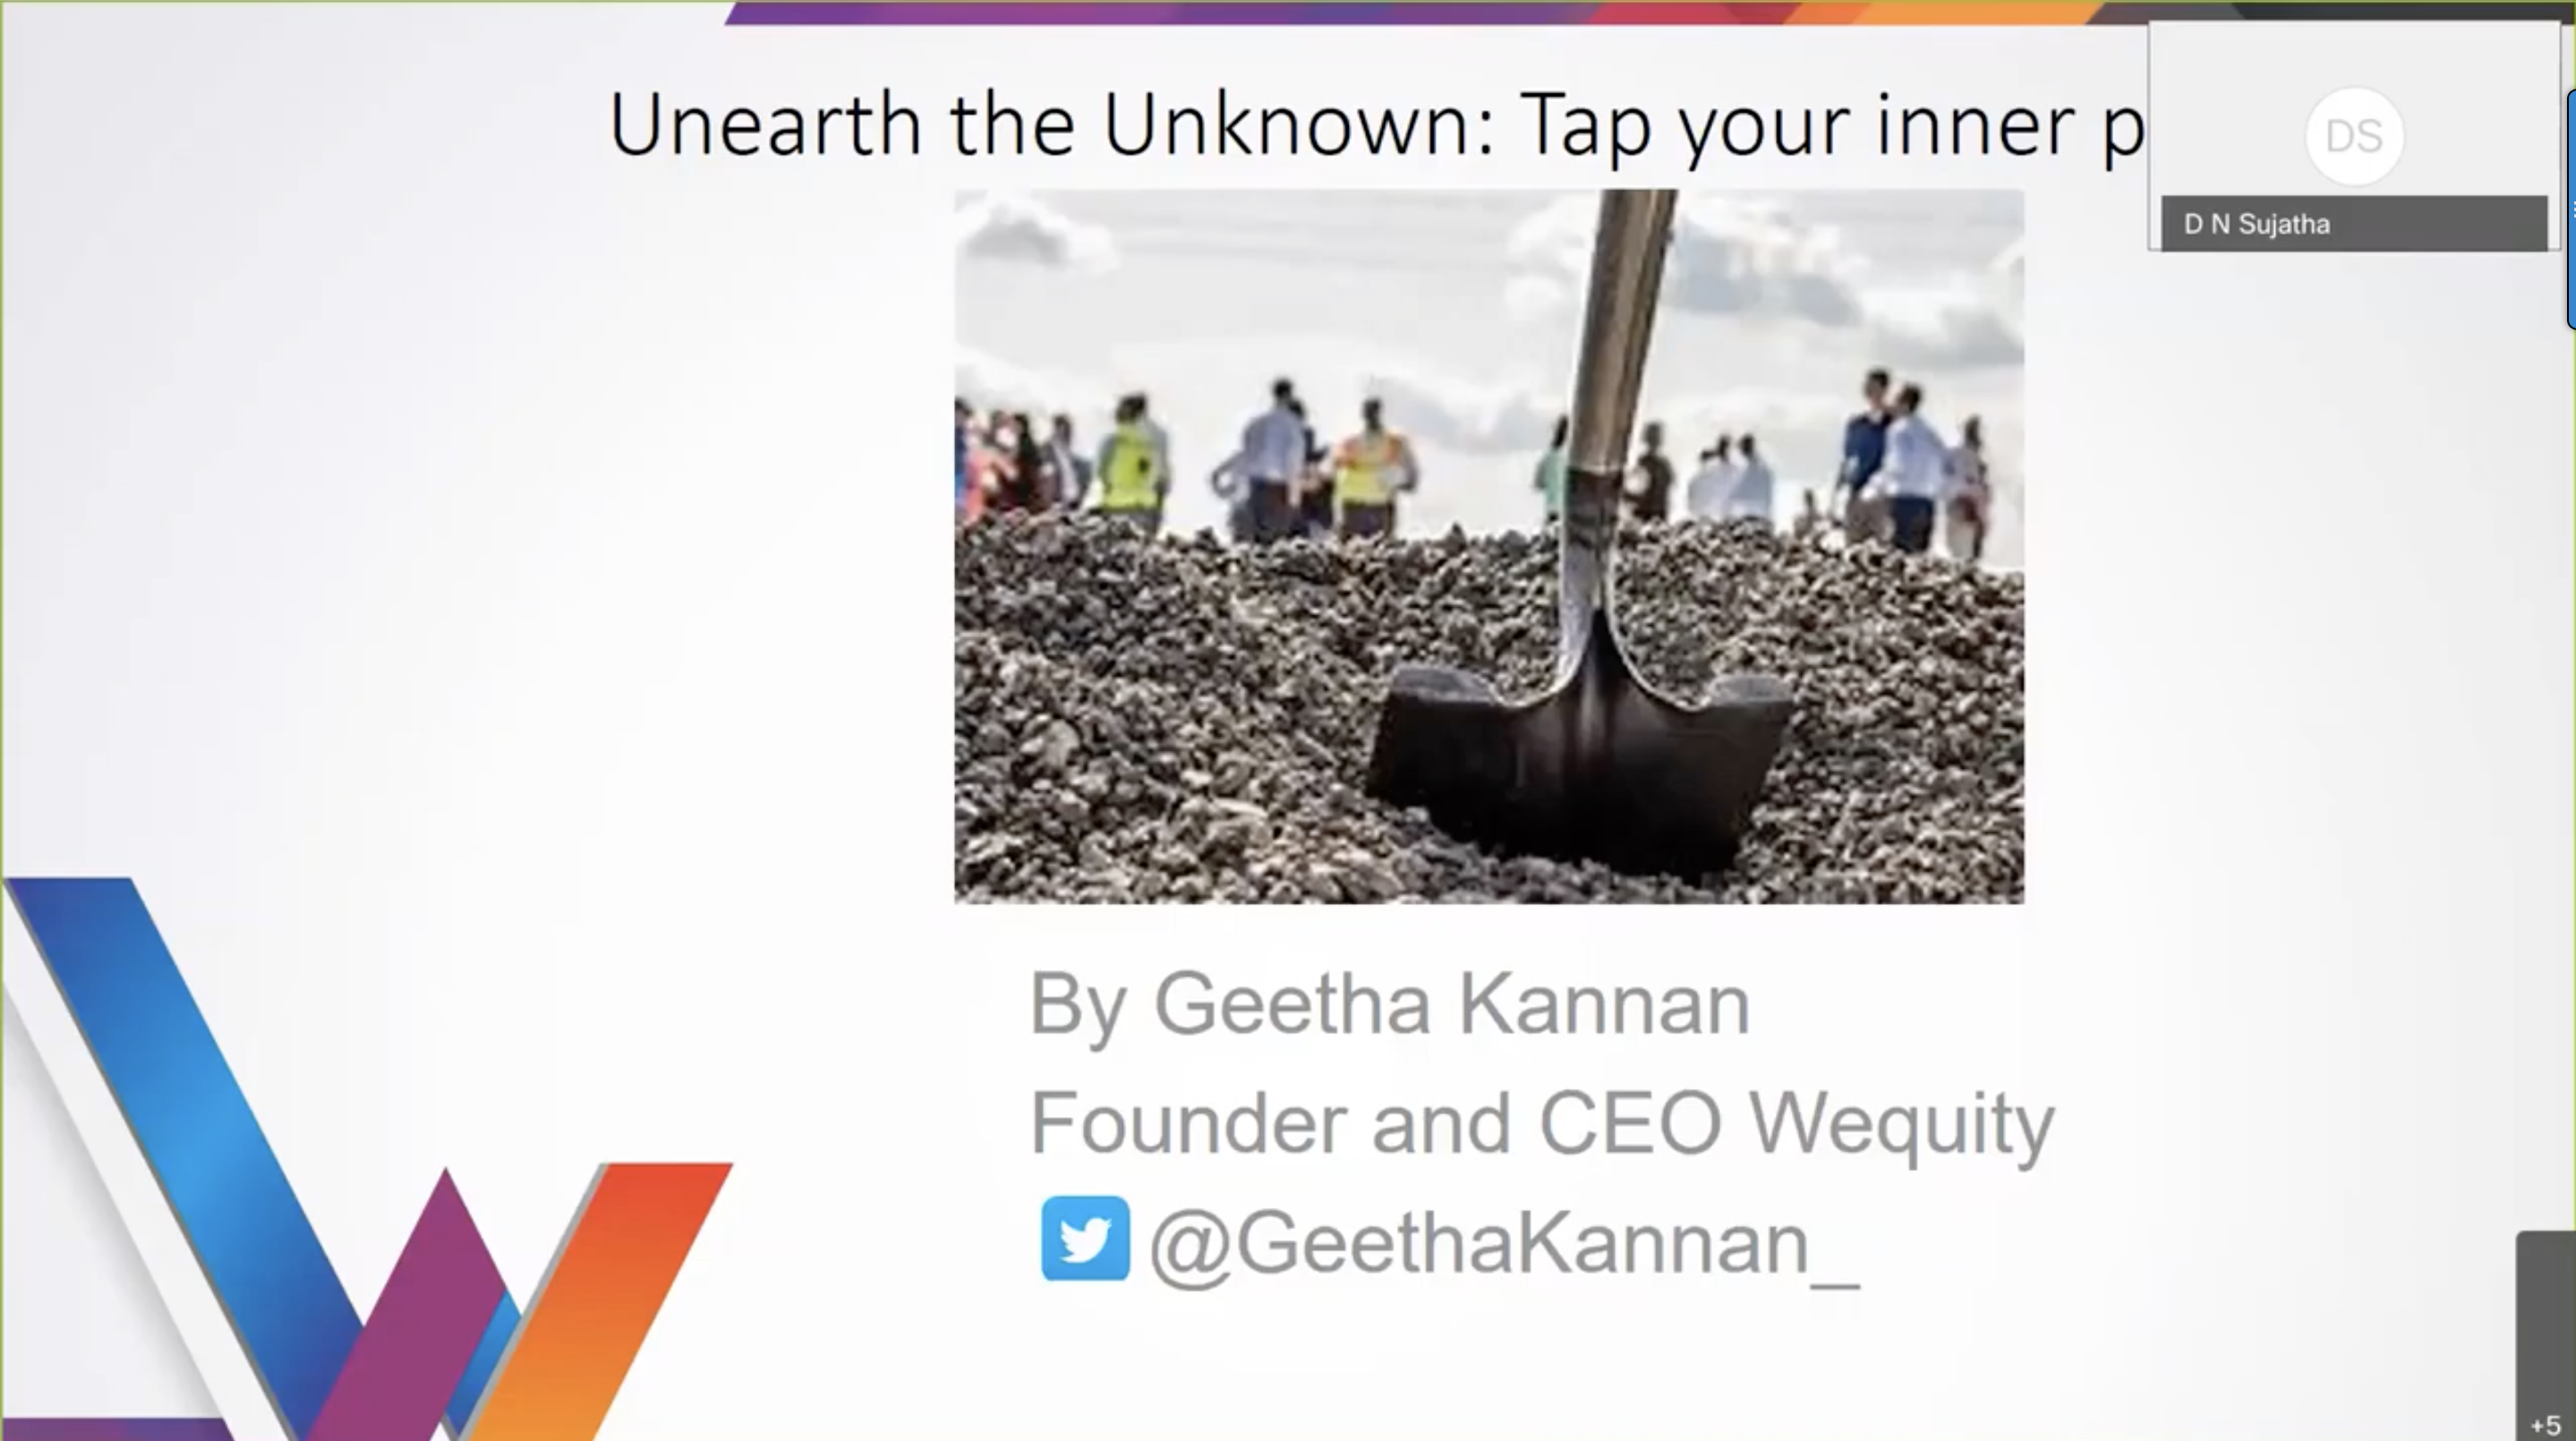 Unearth the Unknown: Tapping Your Inner Potential